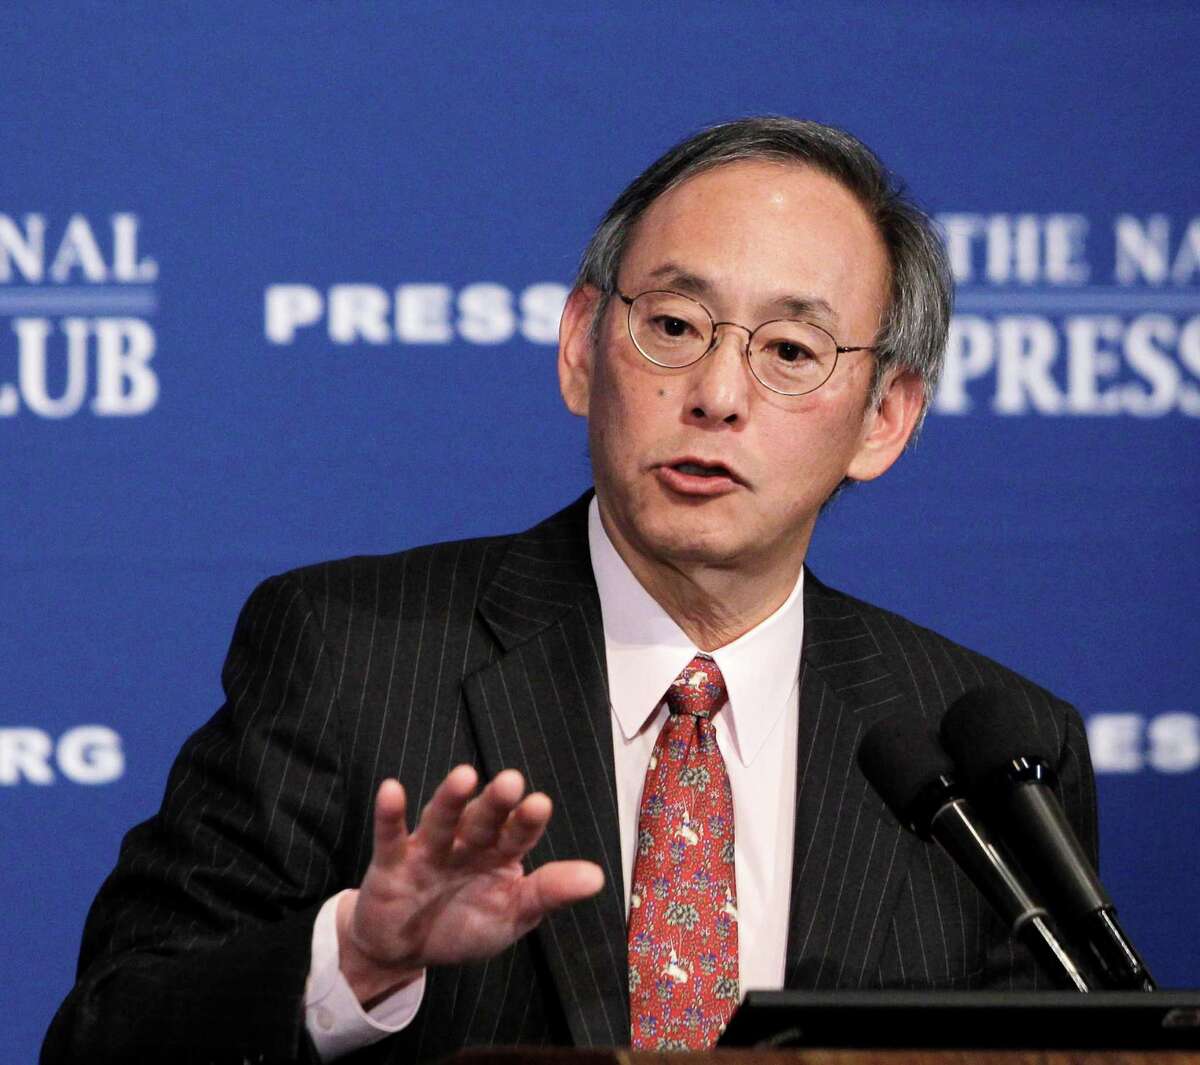 FILE - In this Nov. 29, 2010 file photo, Energy Secretary Steven Chu gives a speech at the National Press Club in Washington. Top officials at the White House circulated a plan calling for the ouster of Energy Secretary Steven Chu and other top Energy Department officials as the administration braced for a political storm brewing over the failing solar energy company Solyndra. (AP Photo/Charles Dharapak, File)